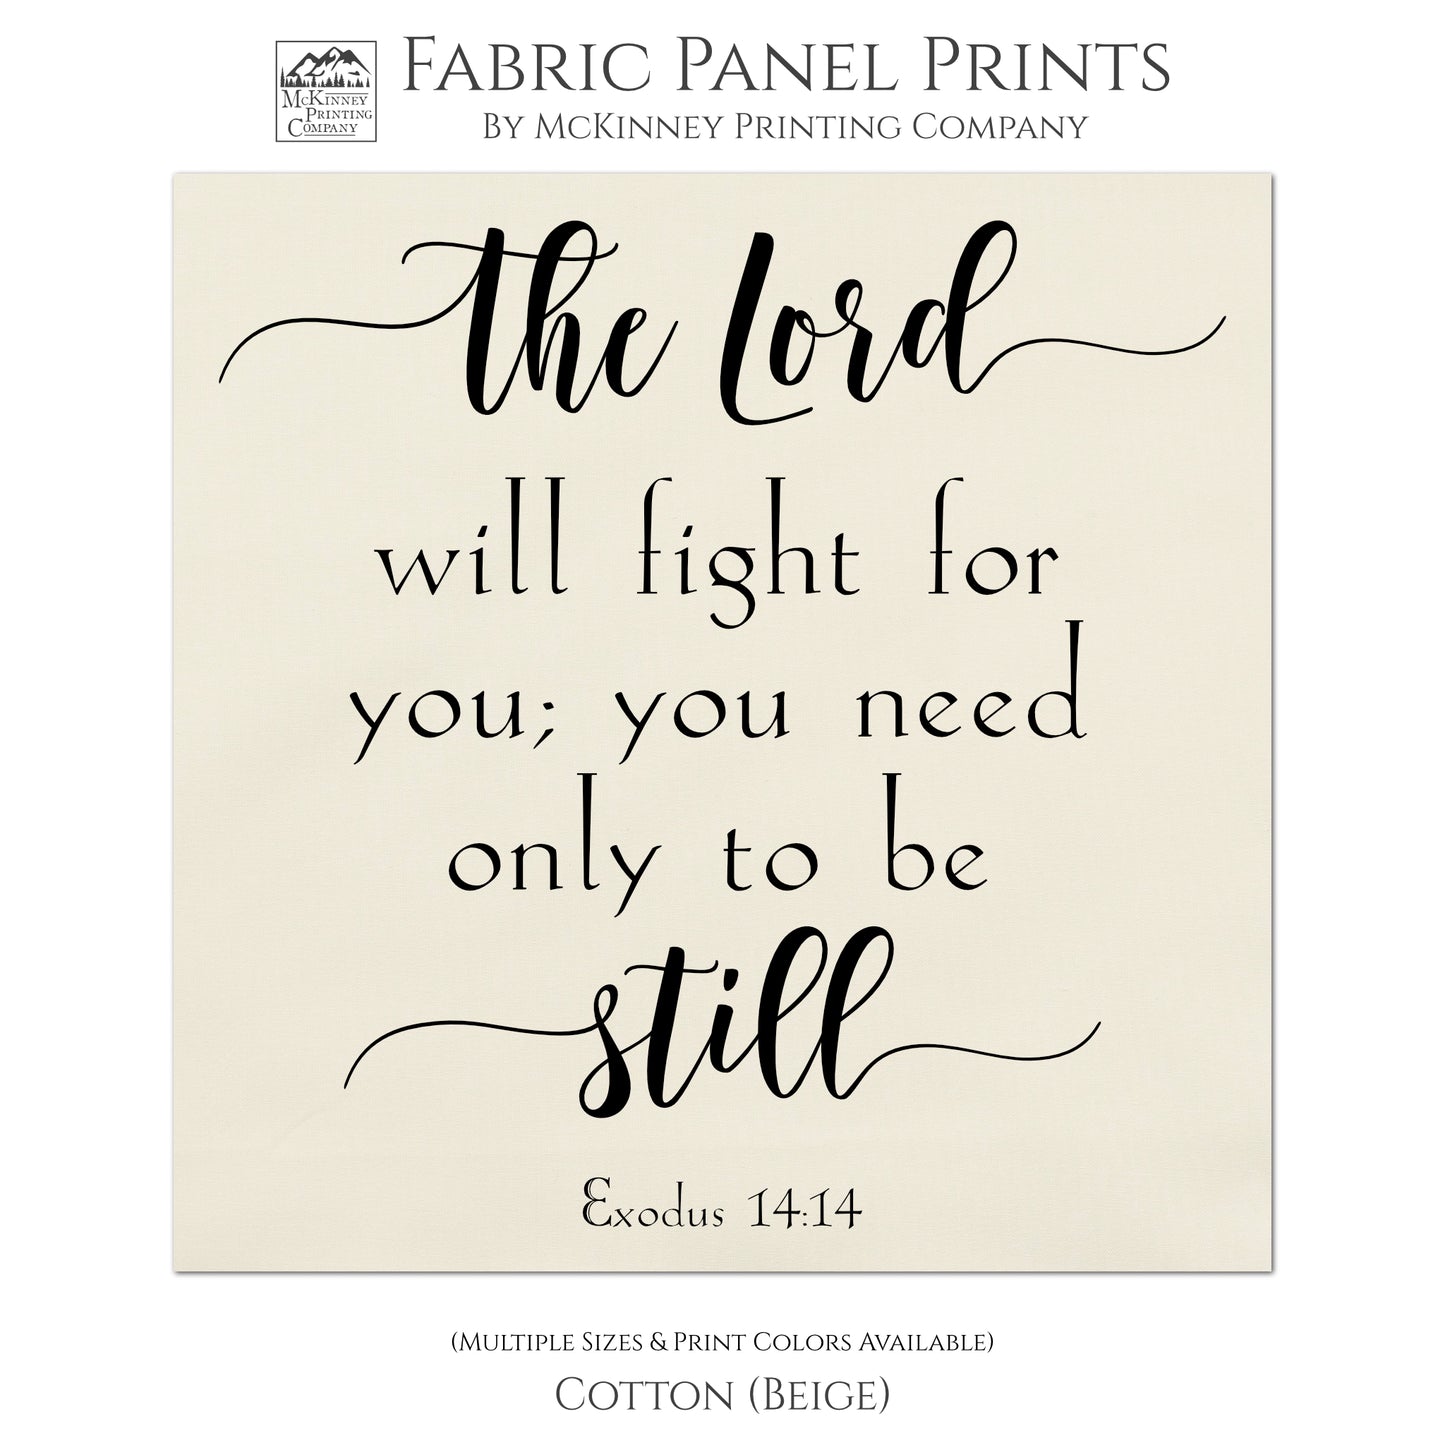 The Lord will fight for you; you need only to be still.  - Exodus 14 14, Scripture Fabric, Religious Fabric, Quilt Block, Fabric Panel, Craft Supplies, Sewing - Cotton